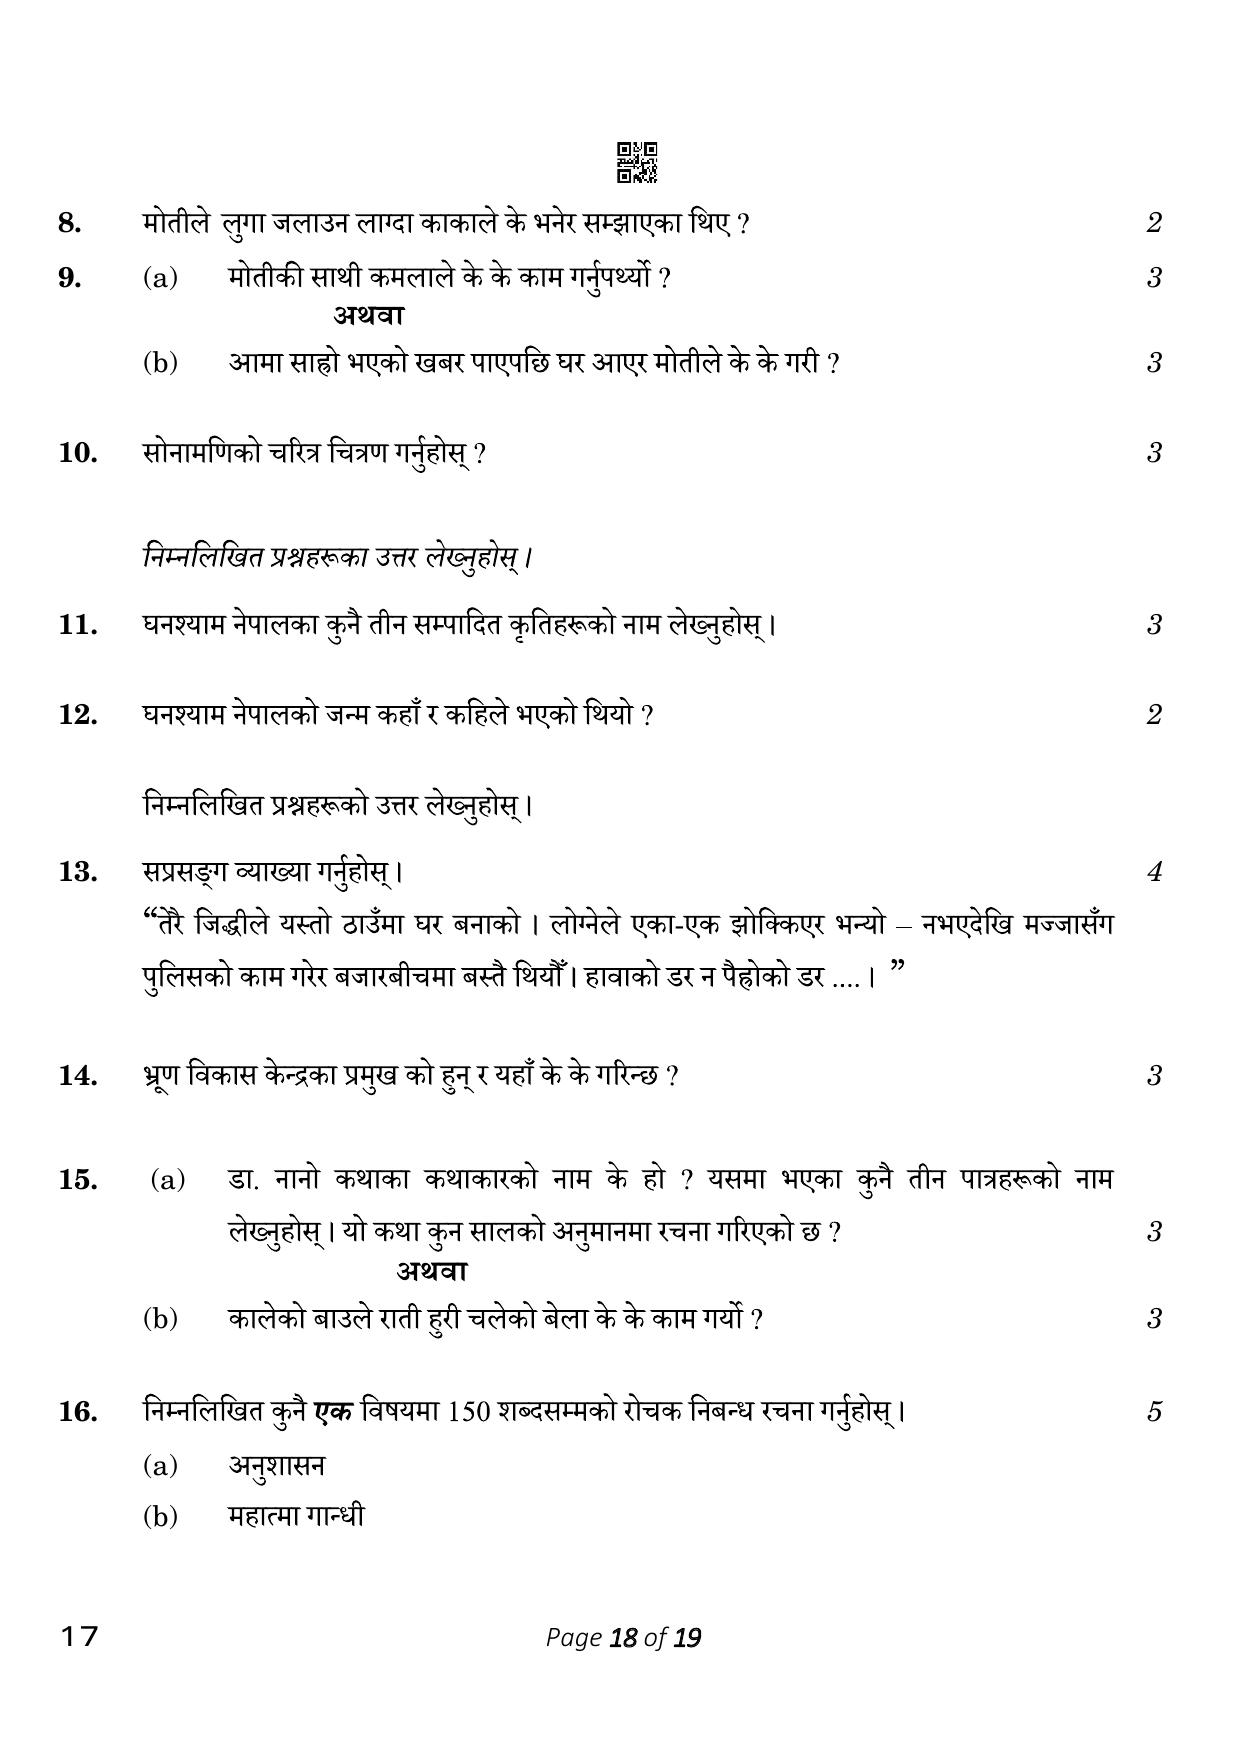 CBSE Class 10 Nepali (Compartment) 2023 Question Paper - Page 18